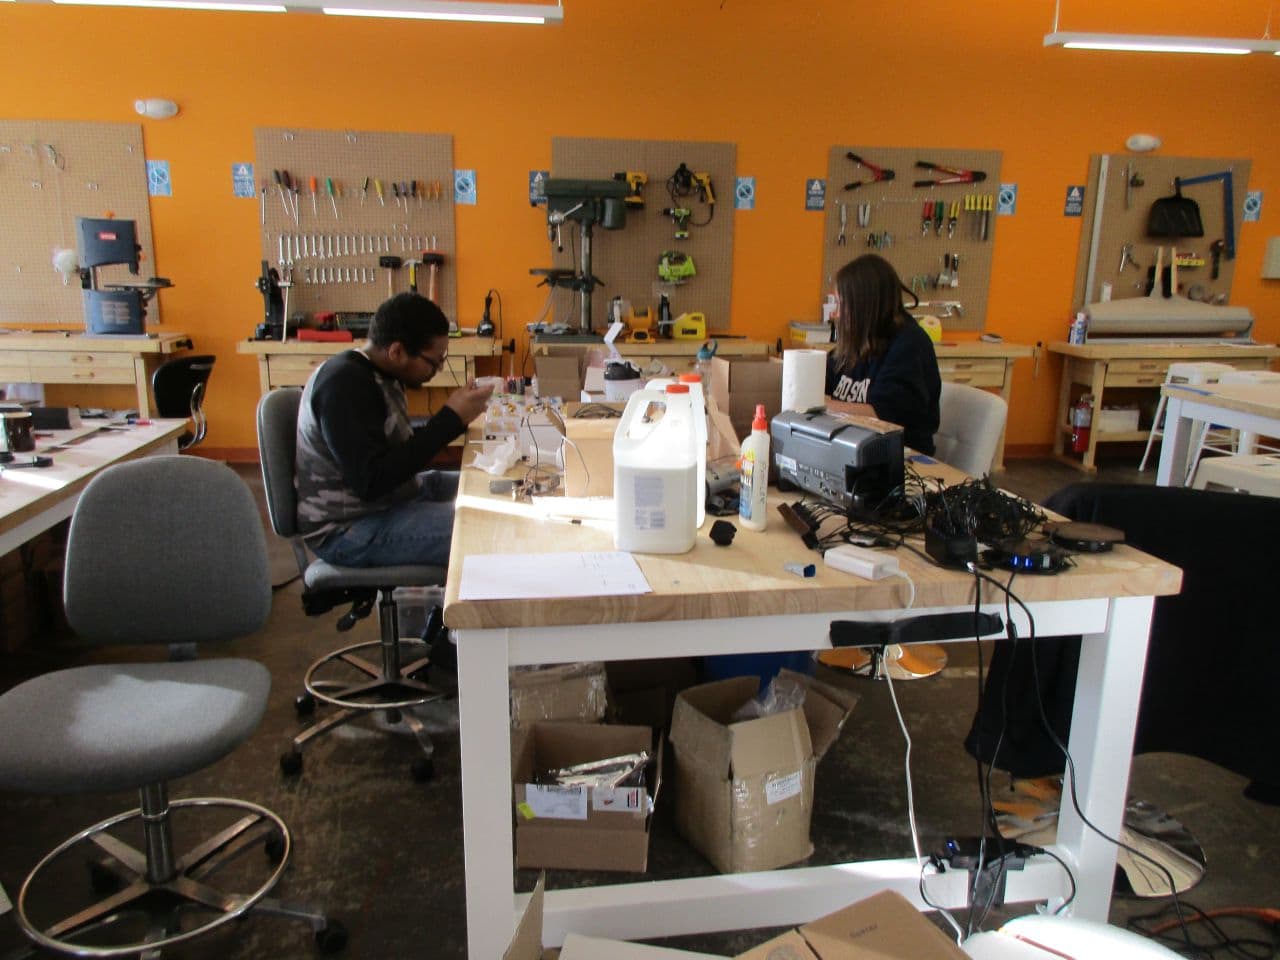 A "makerspace" at MassChallenge allows startups to build prototypes of their products. The facility has expensive equipment like 3-D printers and a laser cutter. (Cindy Carpien for WBUR)